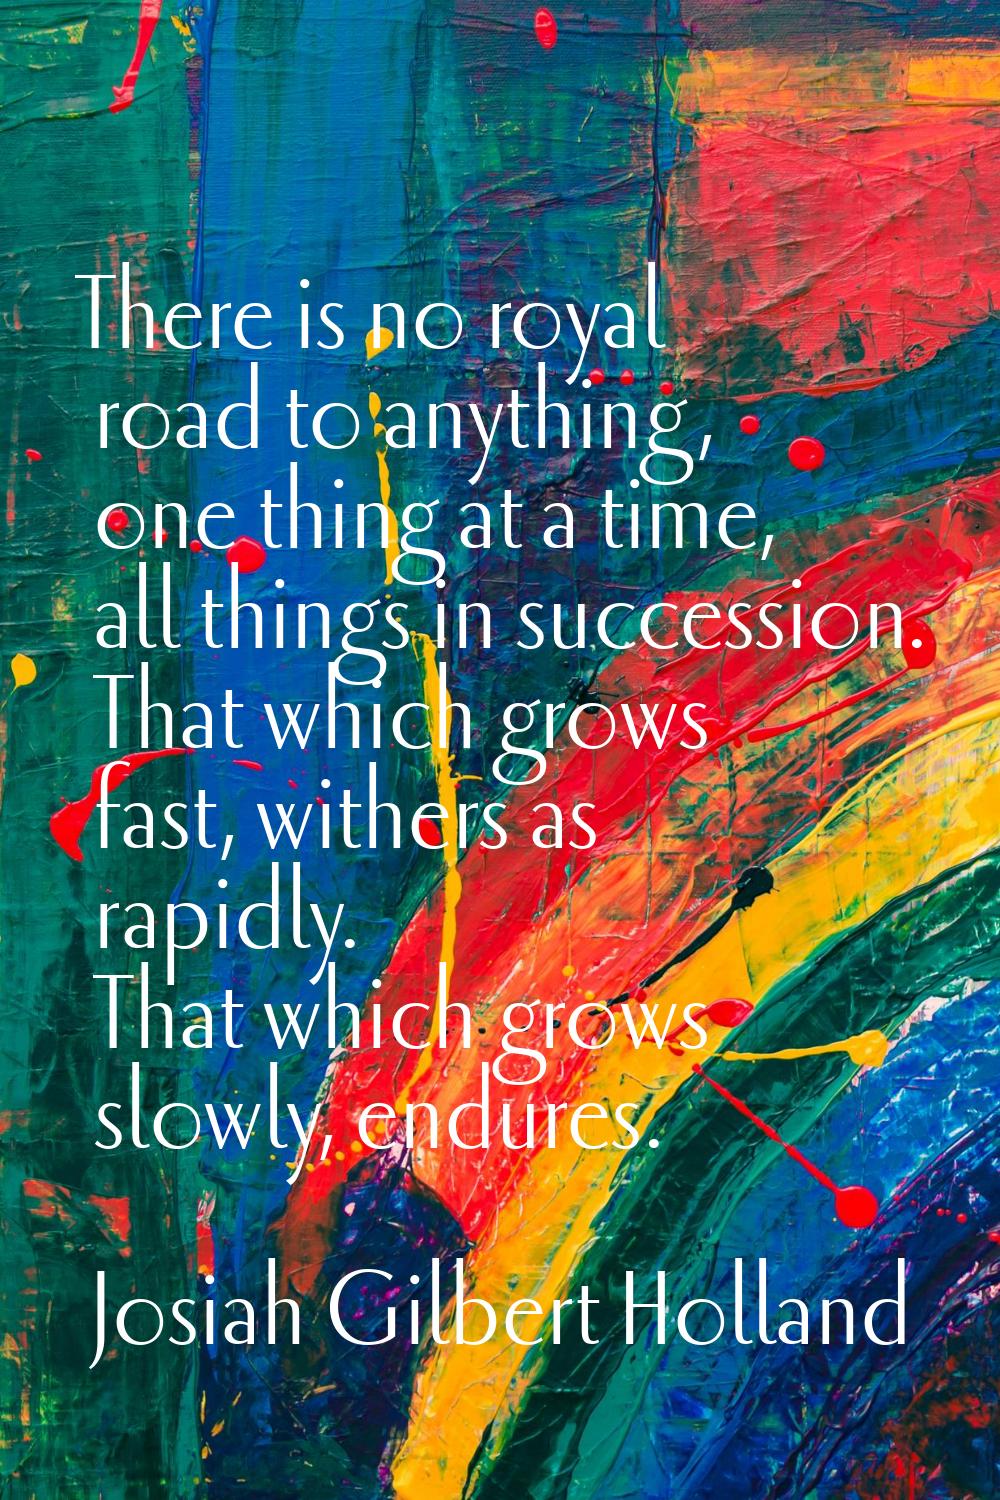 There is no royal road to anything, one thing at a time, all things in succession. That which grows